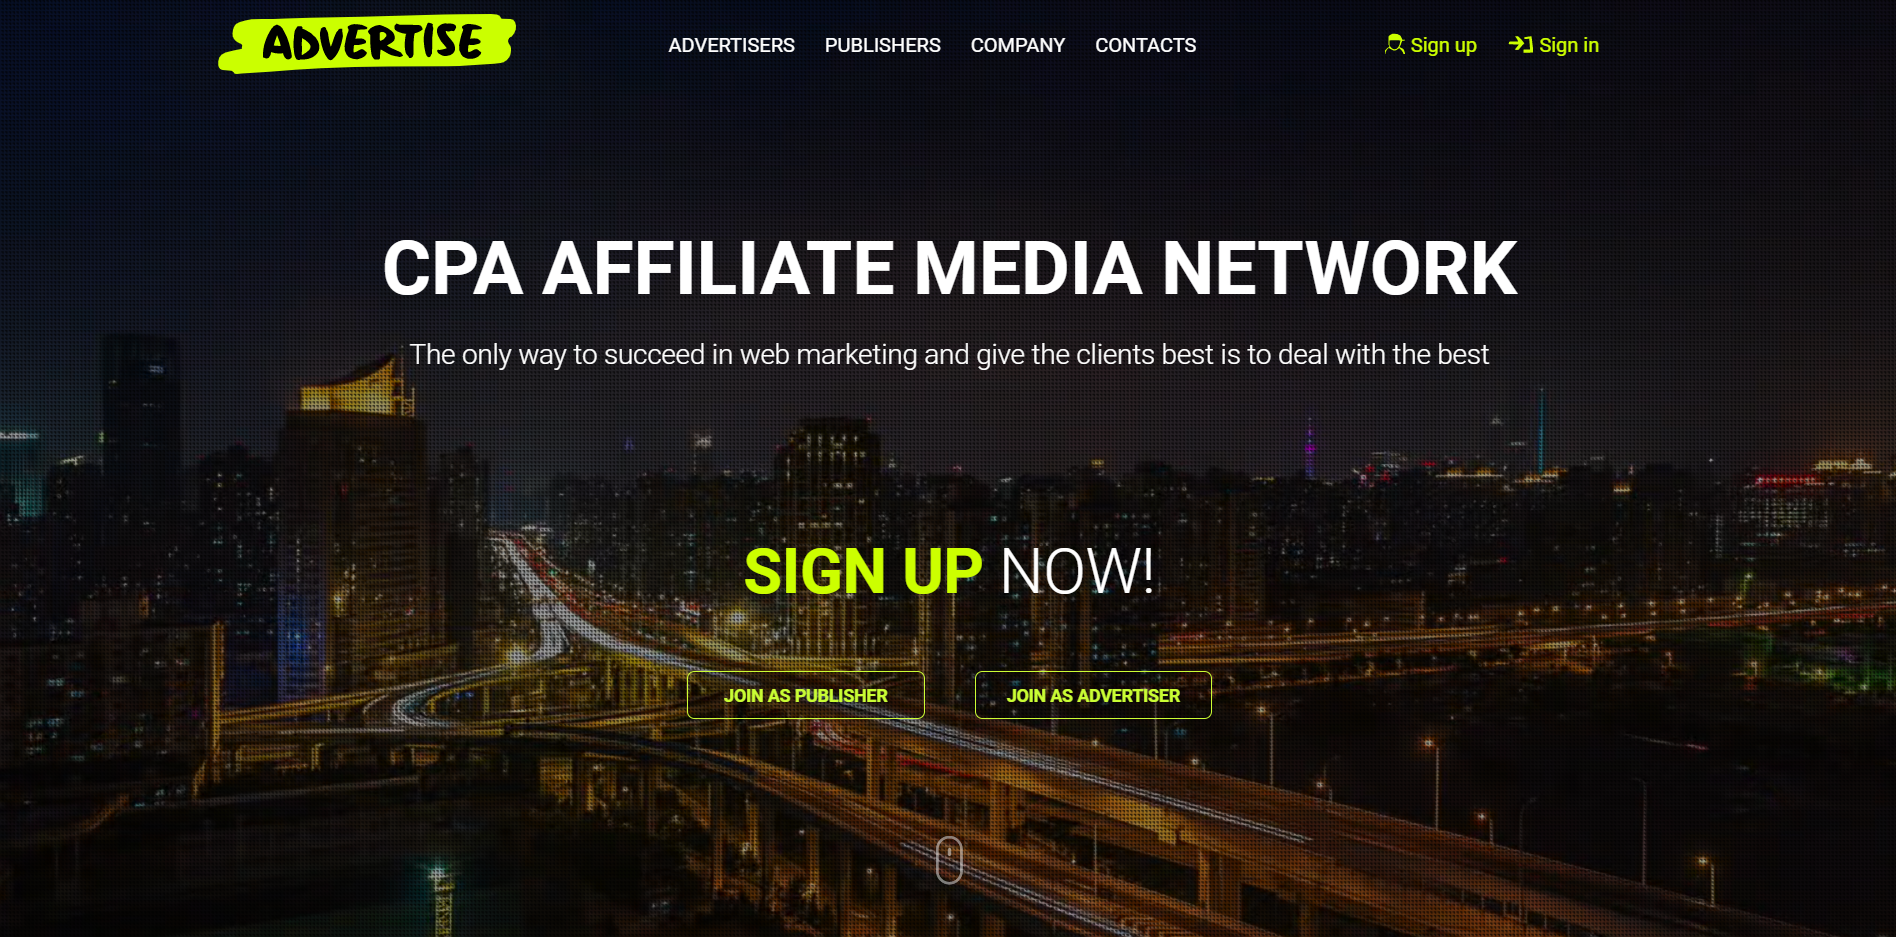 Advertise Affiliate Network Review and Testimonials